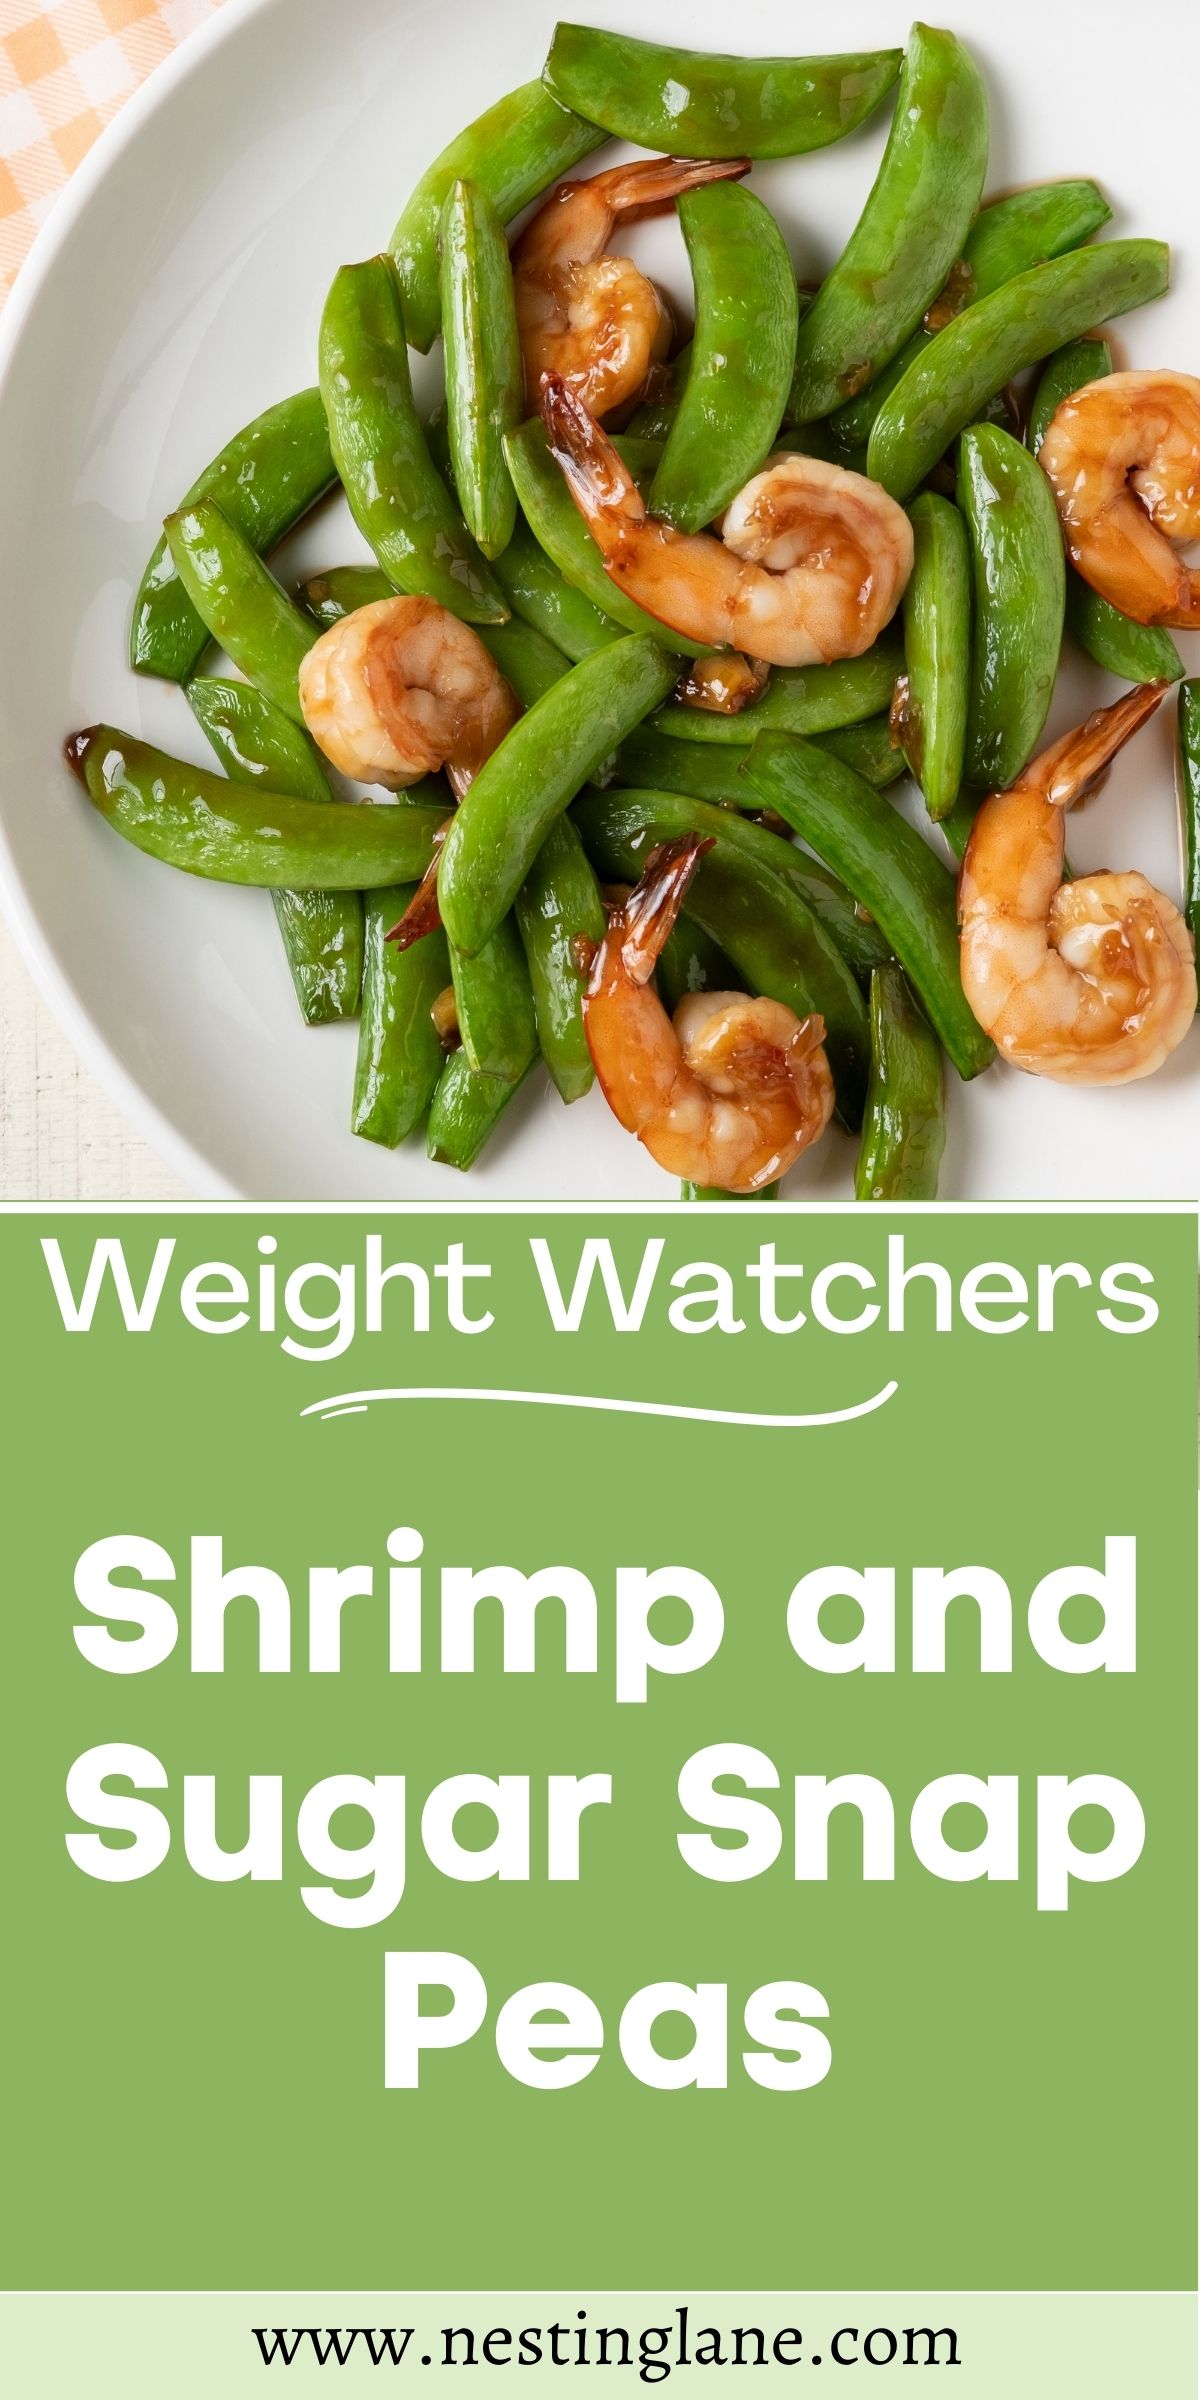 Graphic for Pinterest of Weight Watchers Shrimp and Sugar Snap Peas Recipe.